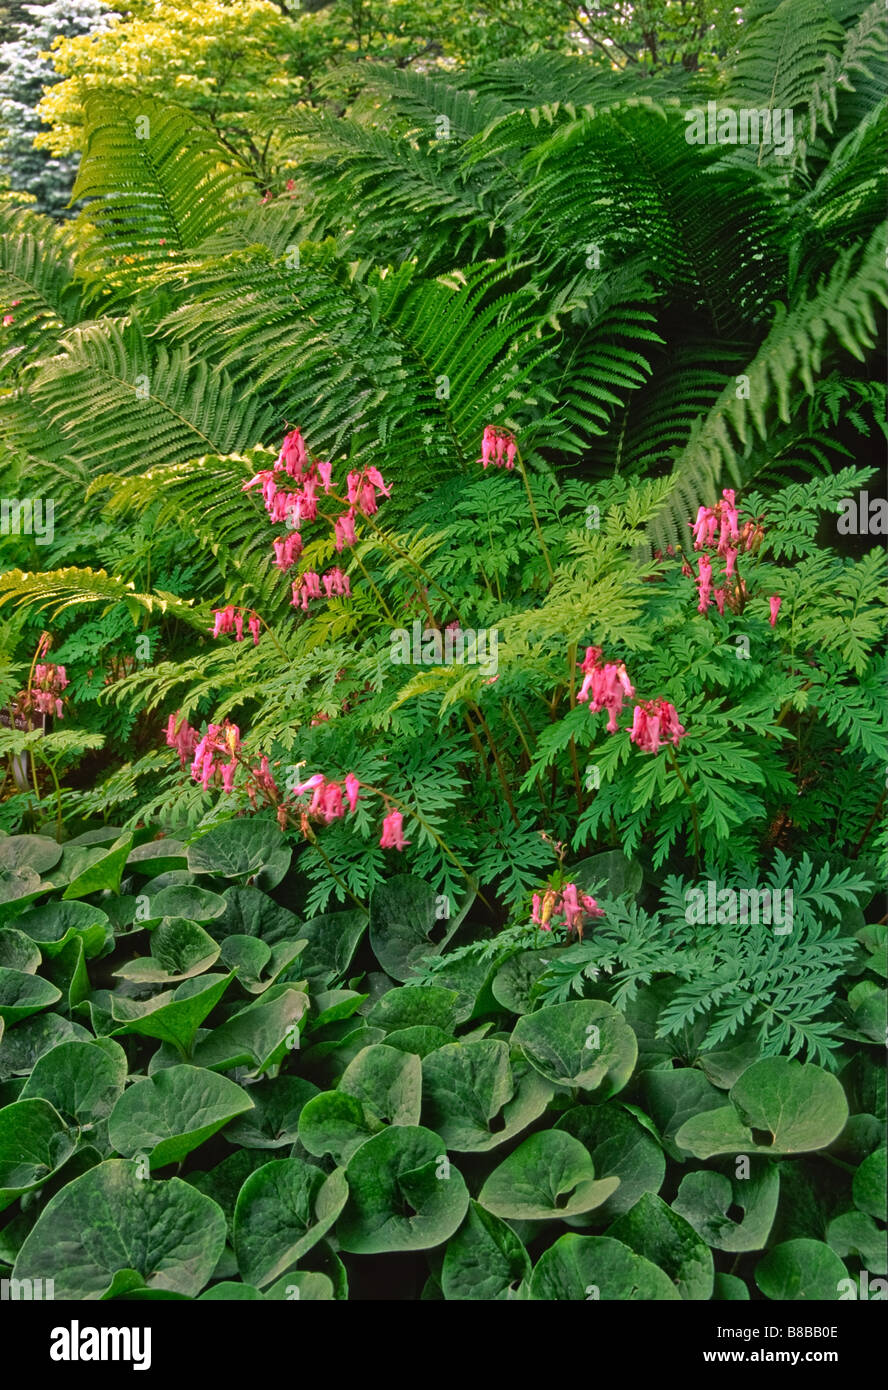 A spring shade garden features native American plants (wildflowers) with contrasting shapes and textures. Stock Photo